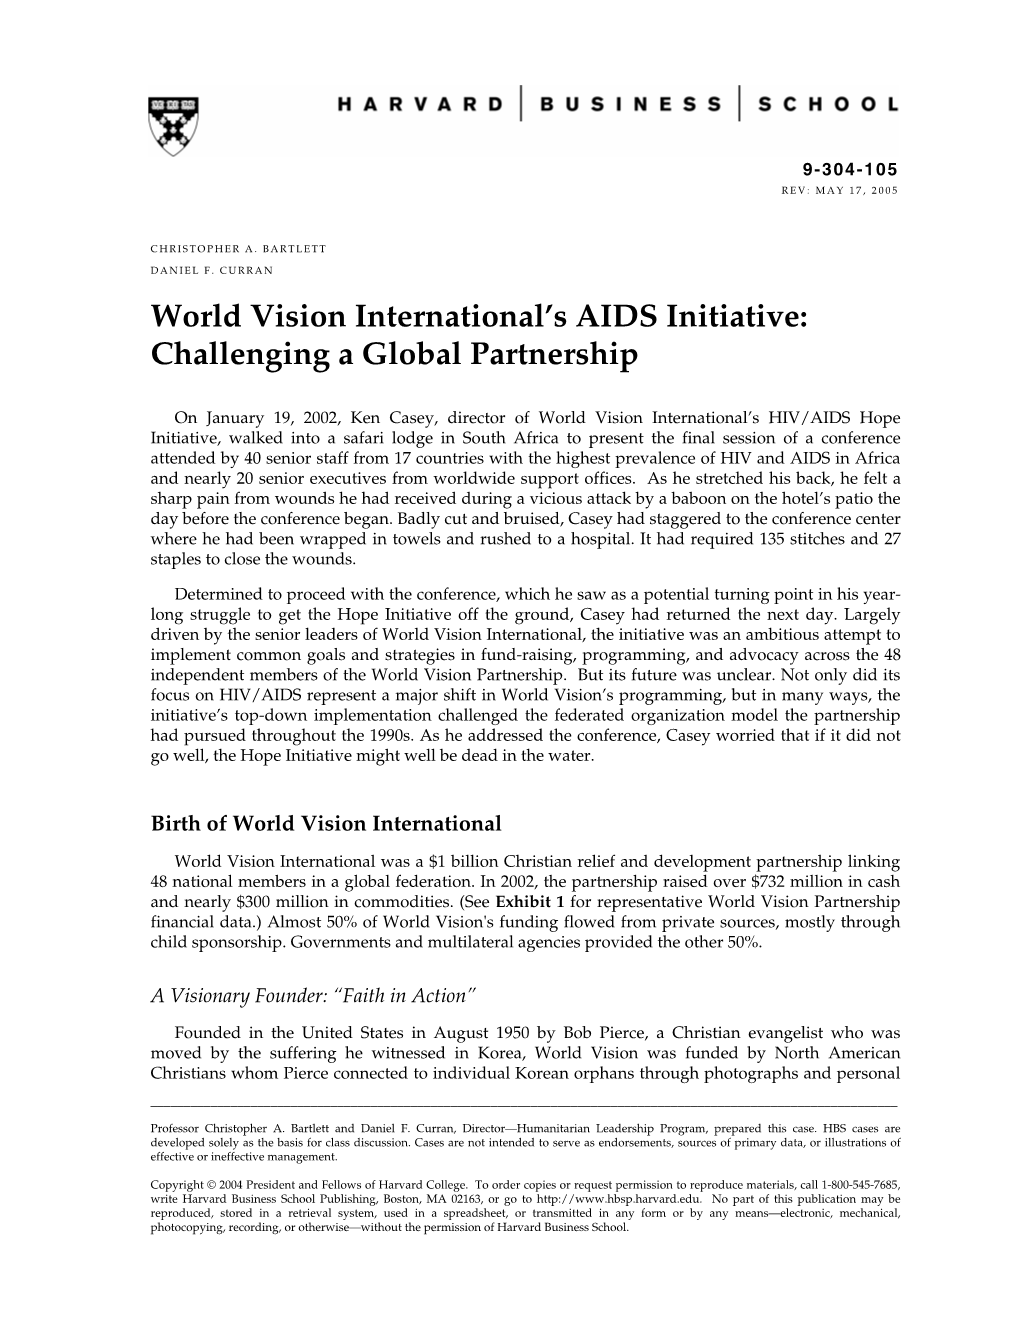 World Vision International's AIDS Initiative: Challenging a Global Partnership